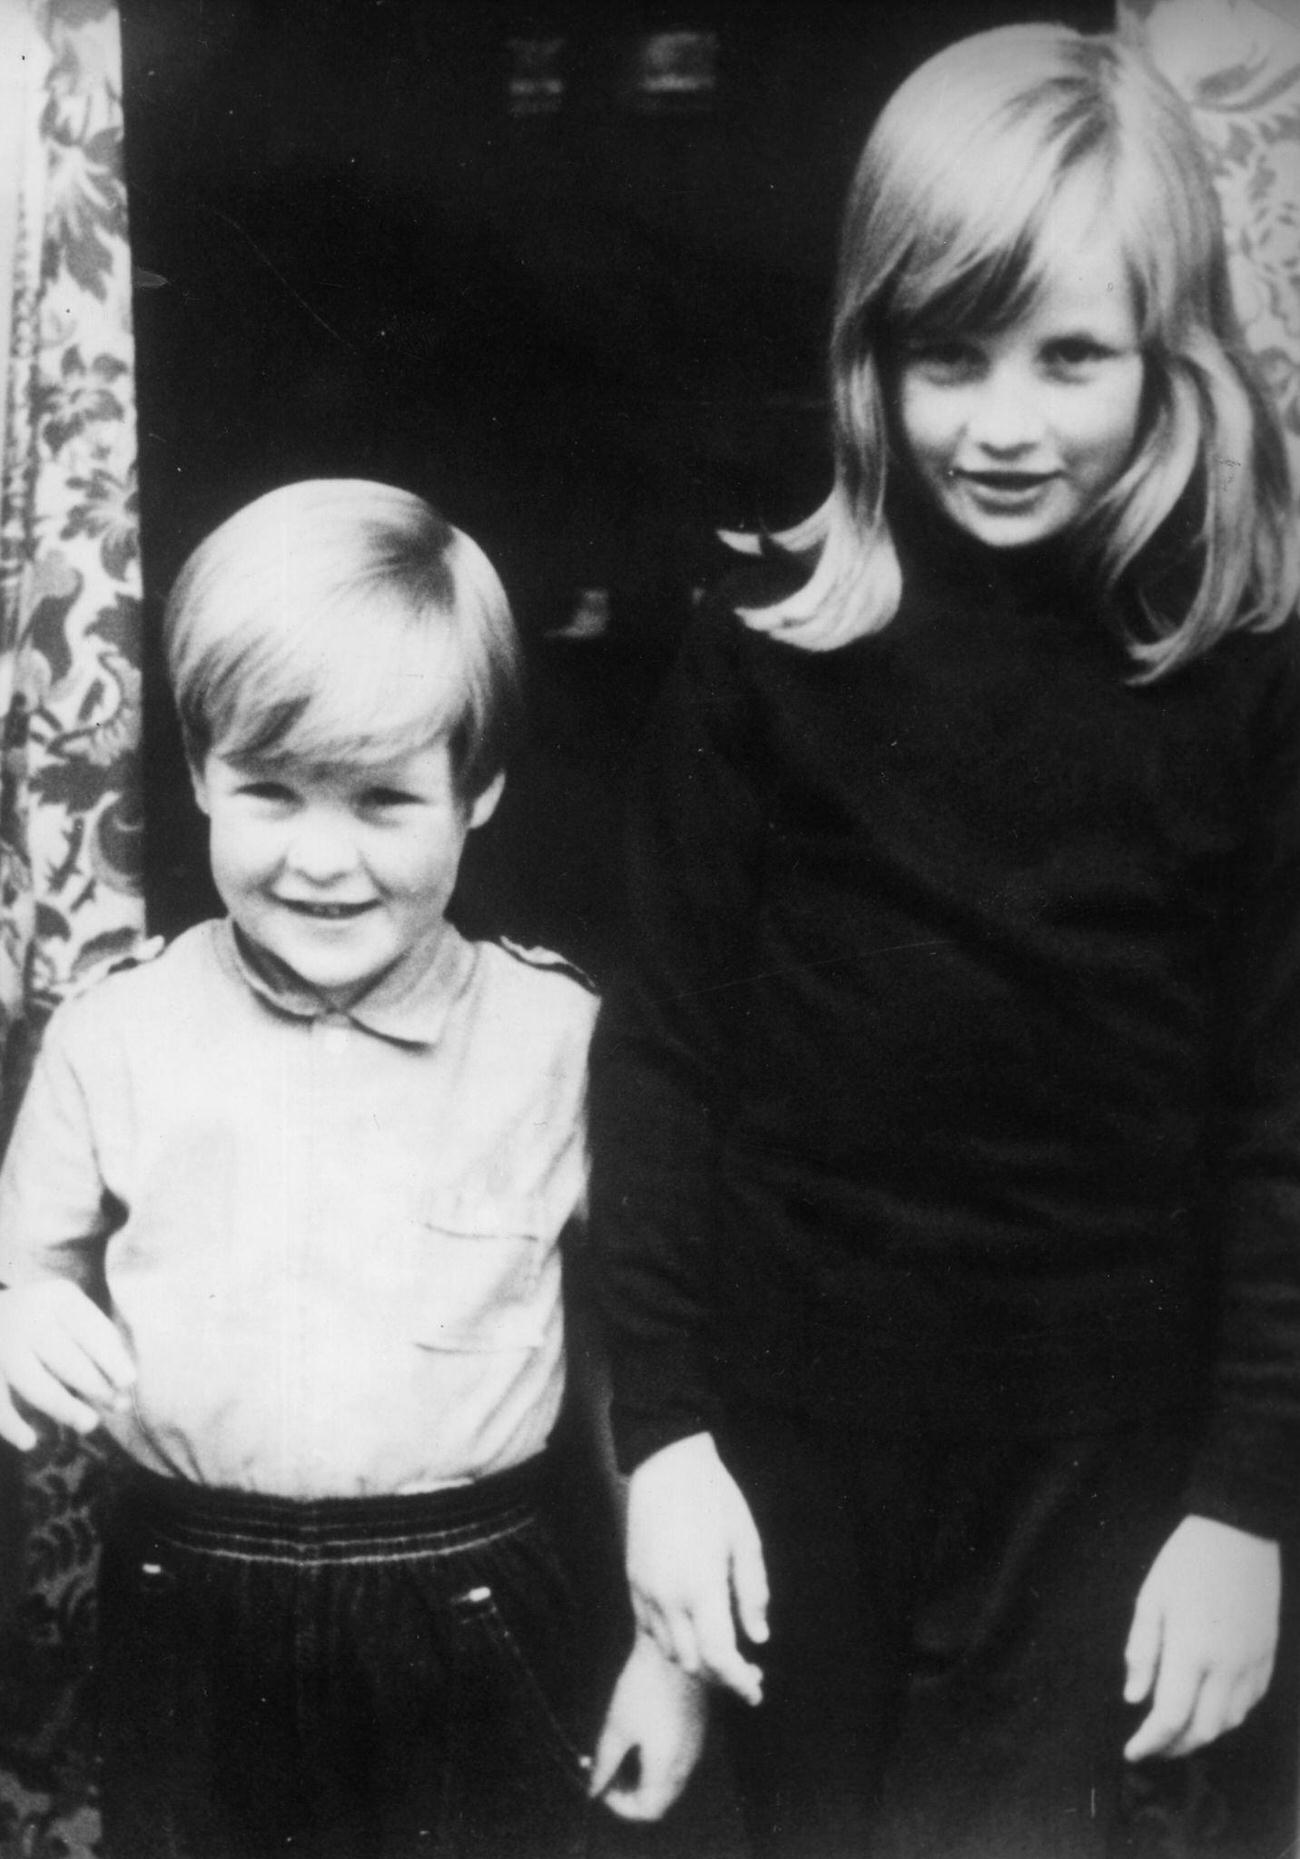 Lady Diana with her brother Charles, Viscount Althorp, at their home in Berkshire, 1968